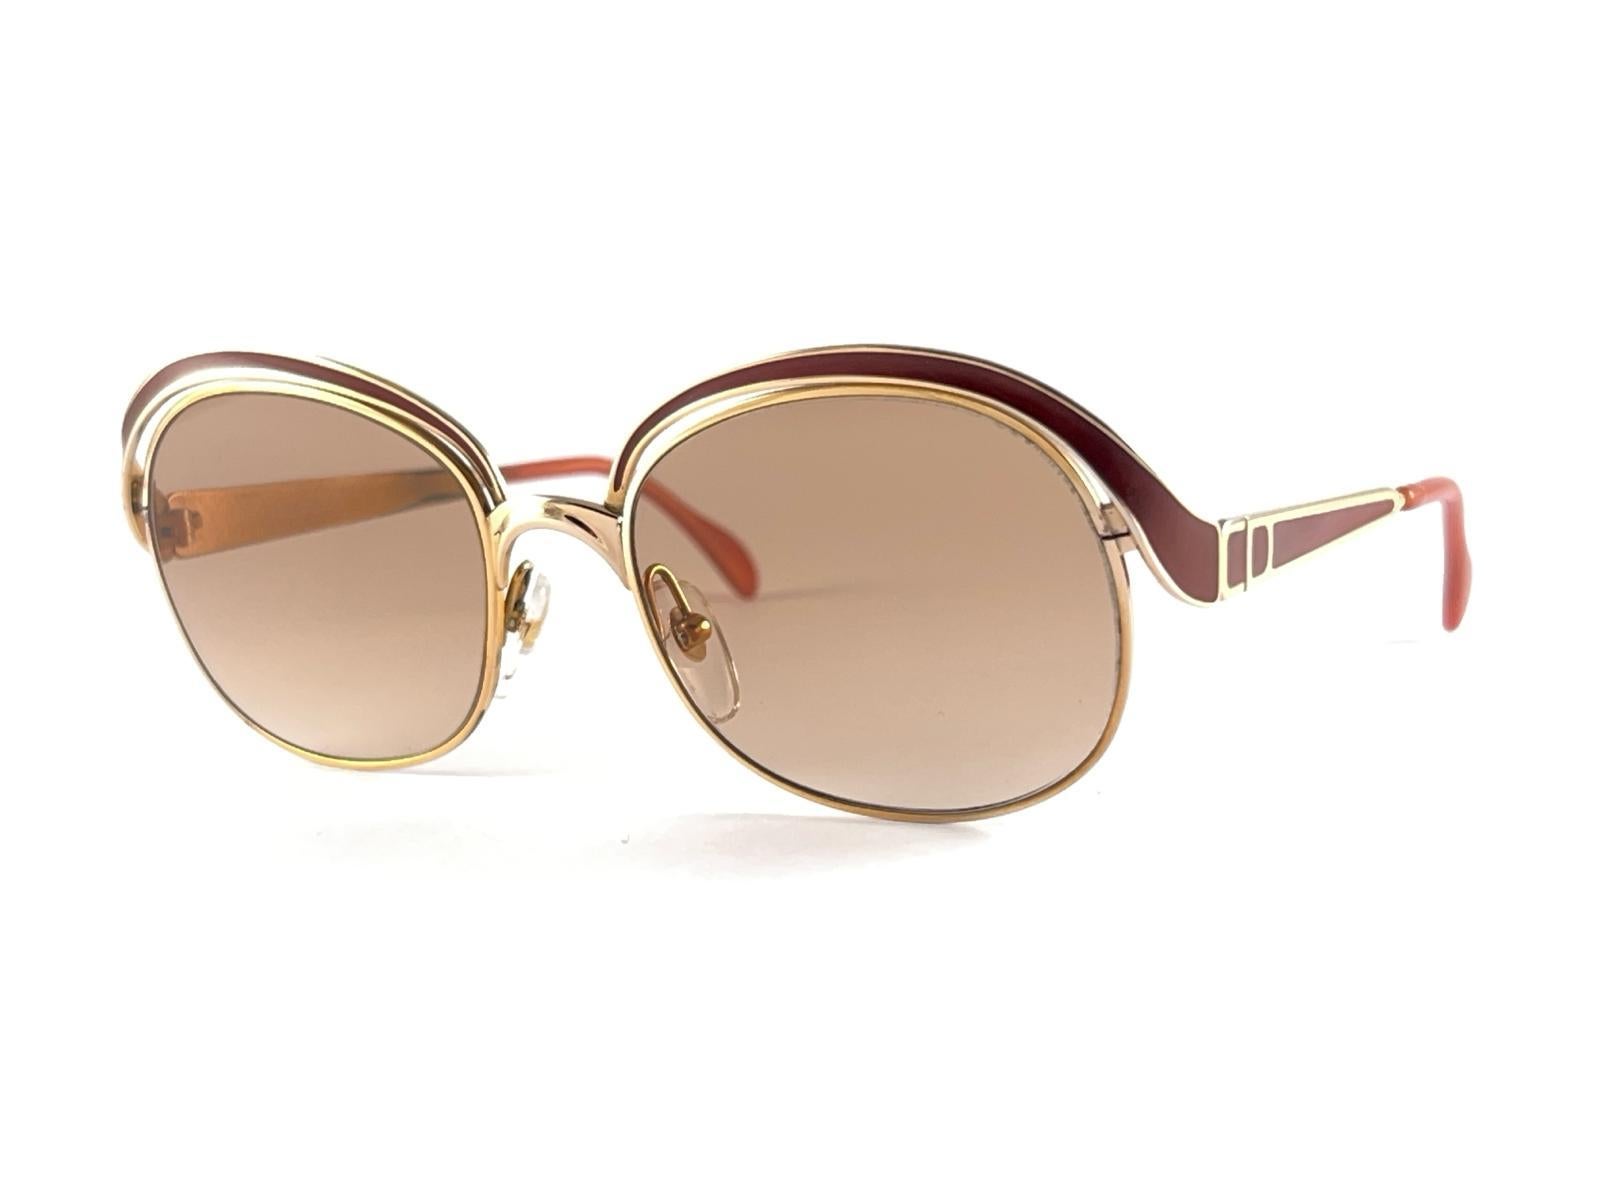 Vintage Christian Dior 2037 43 Gold & Mahogany Sunglasses 1970'S Austria In New Condition For Sale In Baleares, Baleares